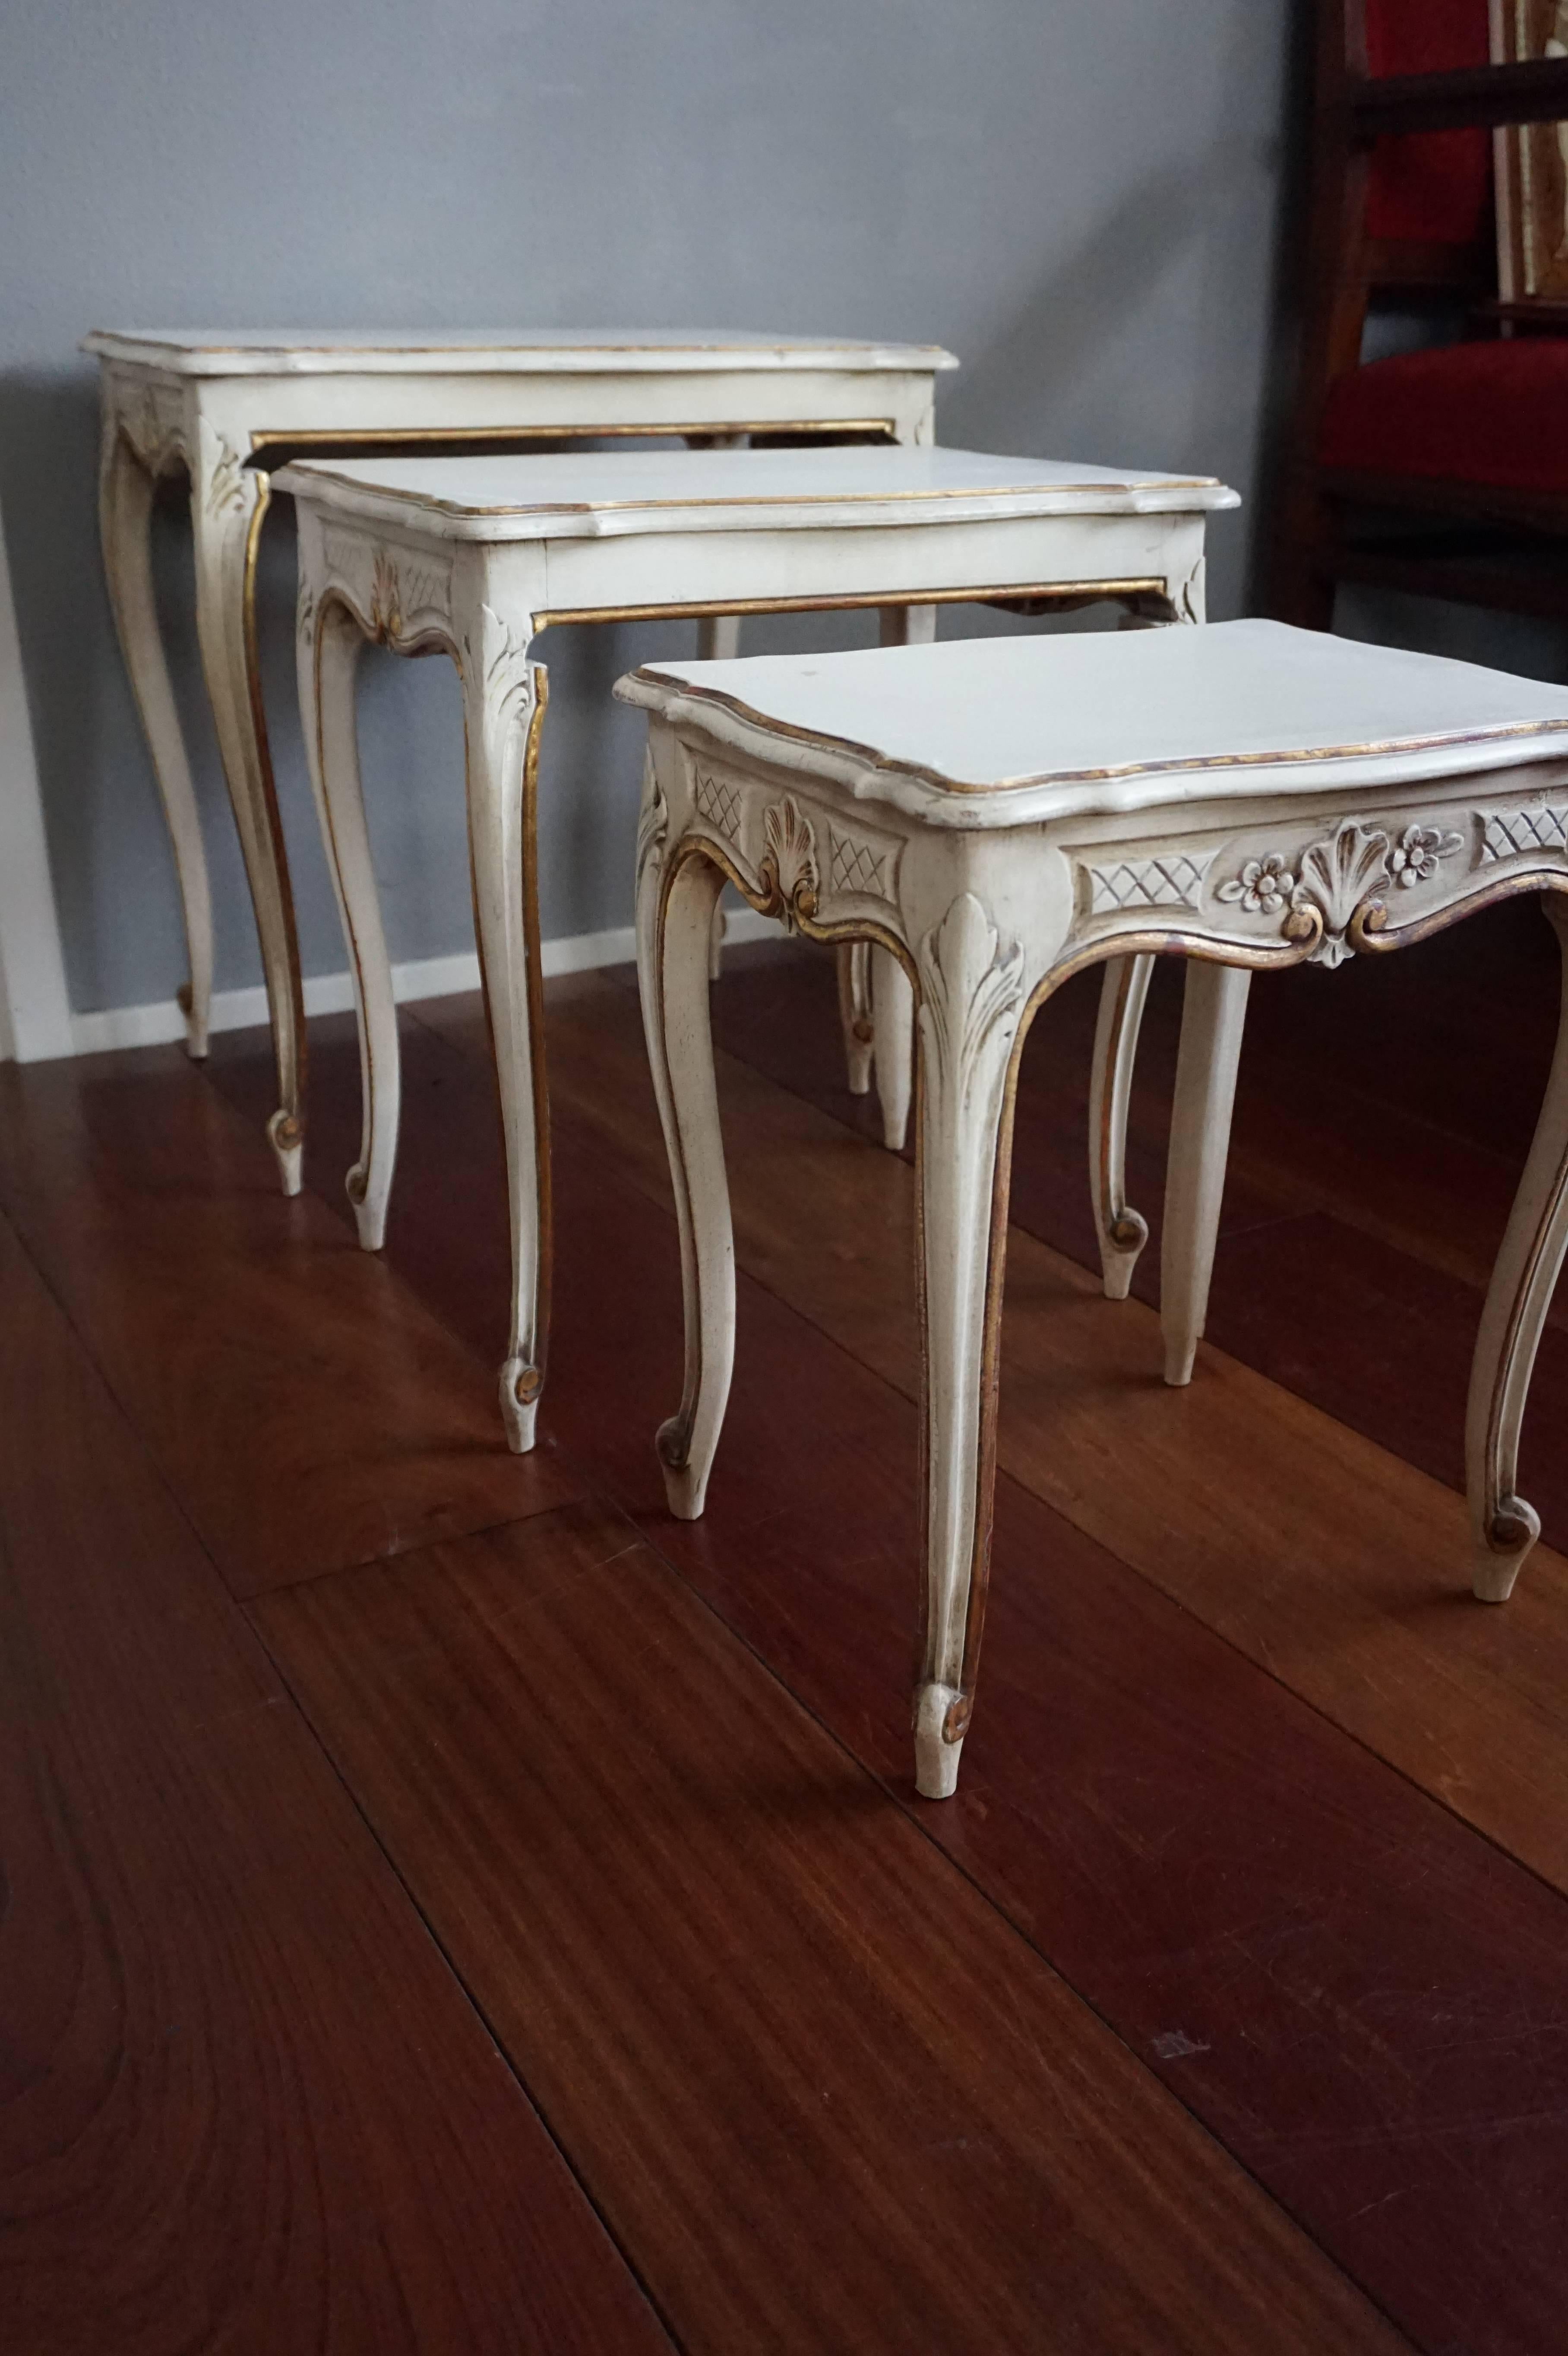 Early 20th Century Italian or French Nest of Tables in Beige-White with Gilding 2